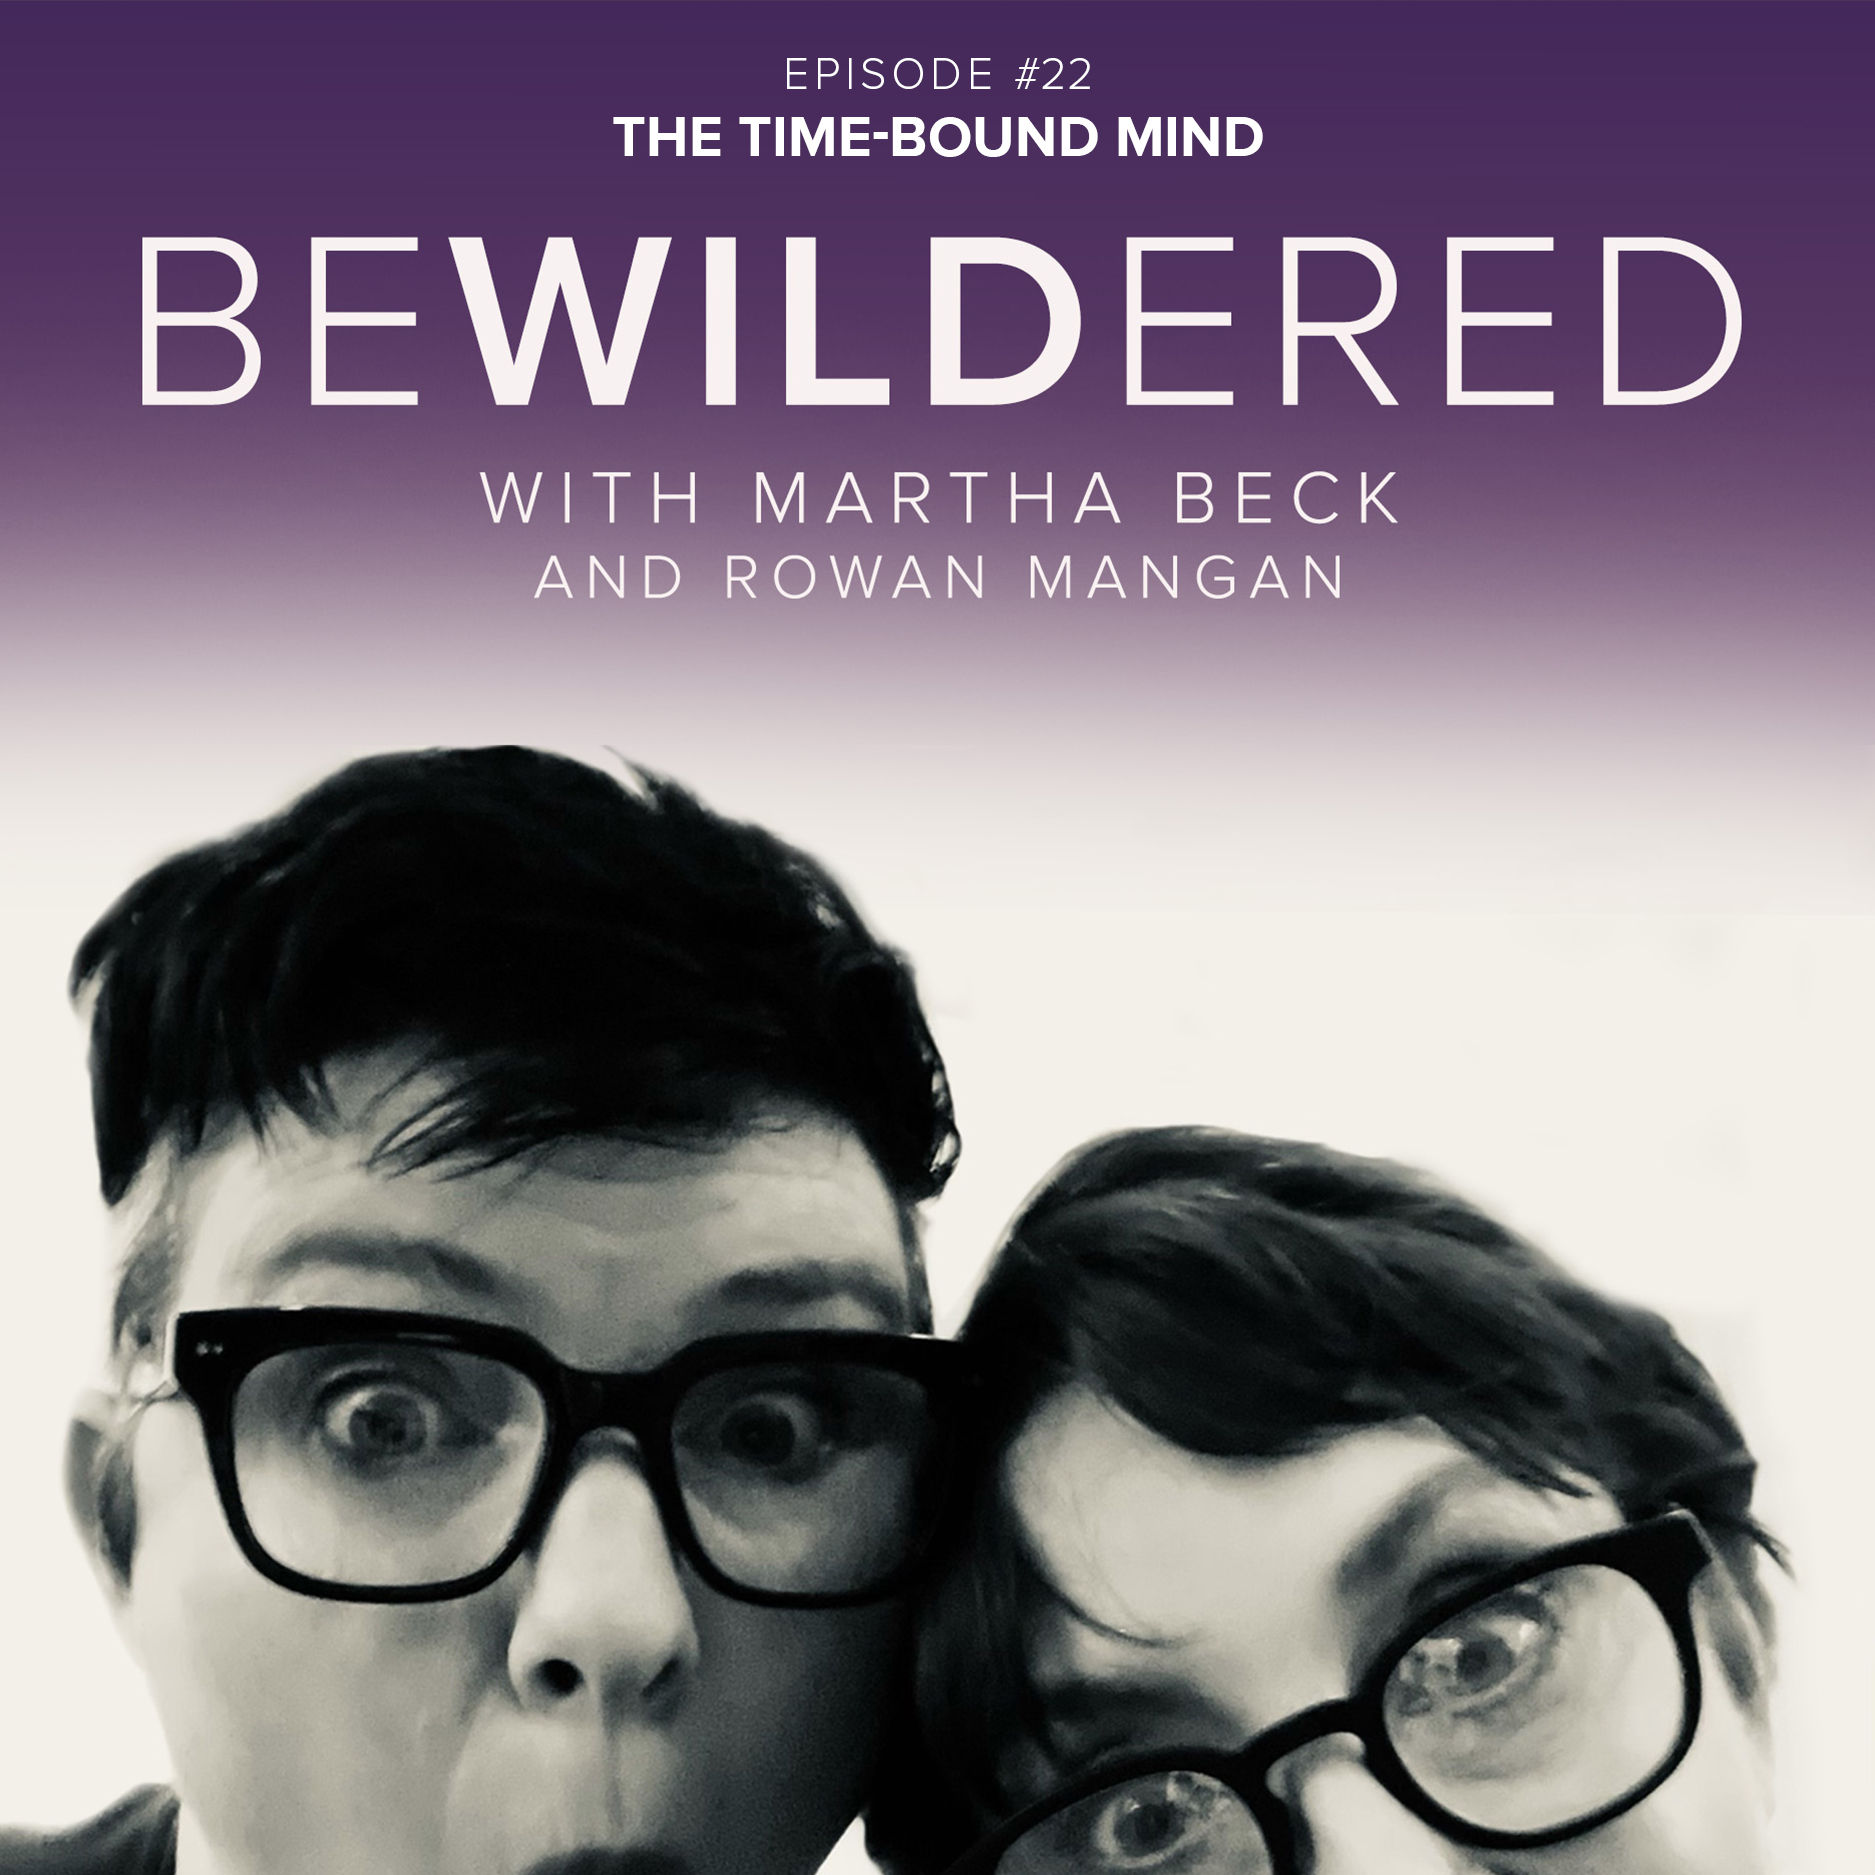 Image for Episode #22 The Time-Bound Mind for the Bewildered Podcast with Martha Beck and Rowan Mangan